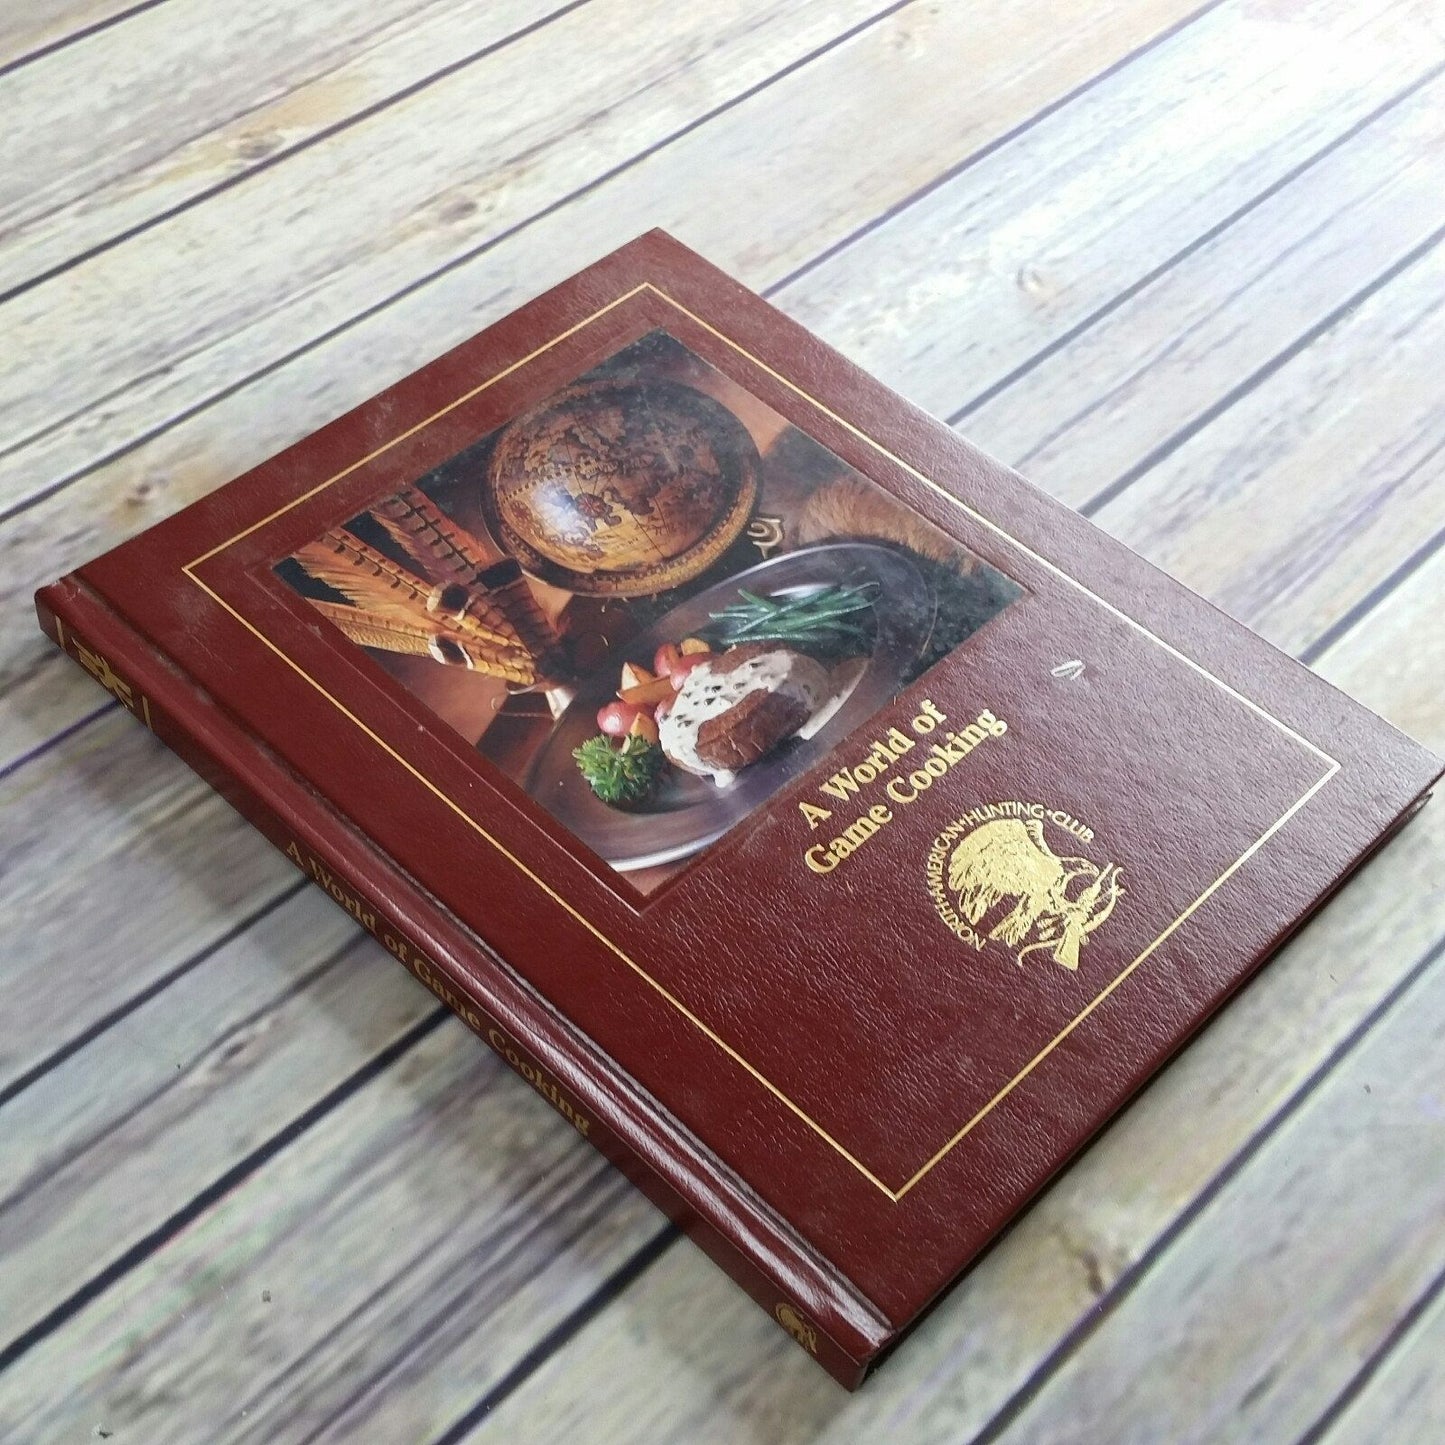 Vintage Cookbook A World of Game Cooking 1998 Teresa Marrone North American Hunting Club Hardcover Wild Game Recipes